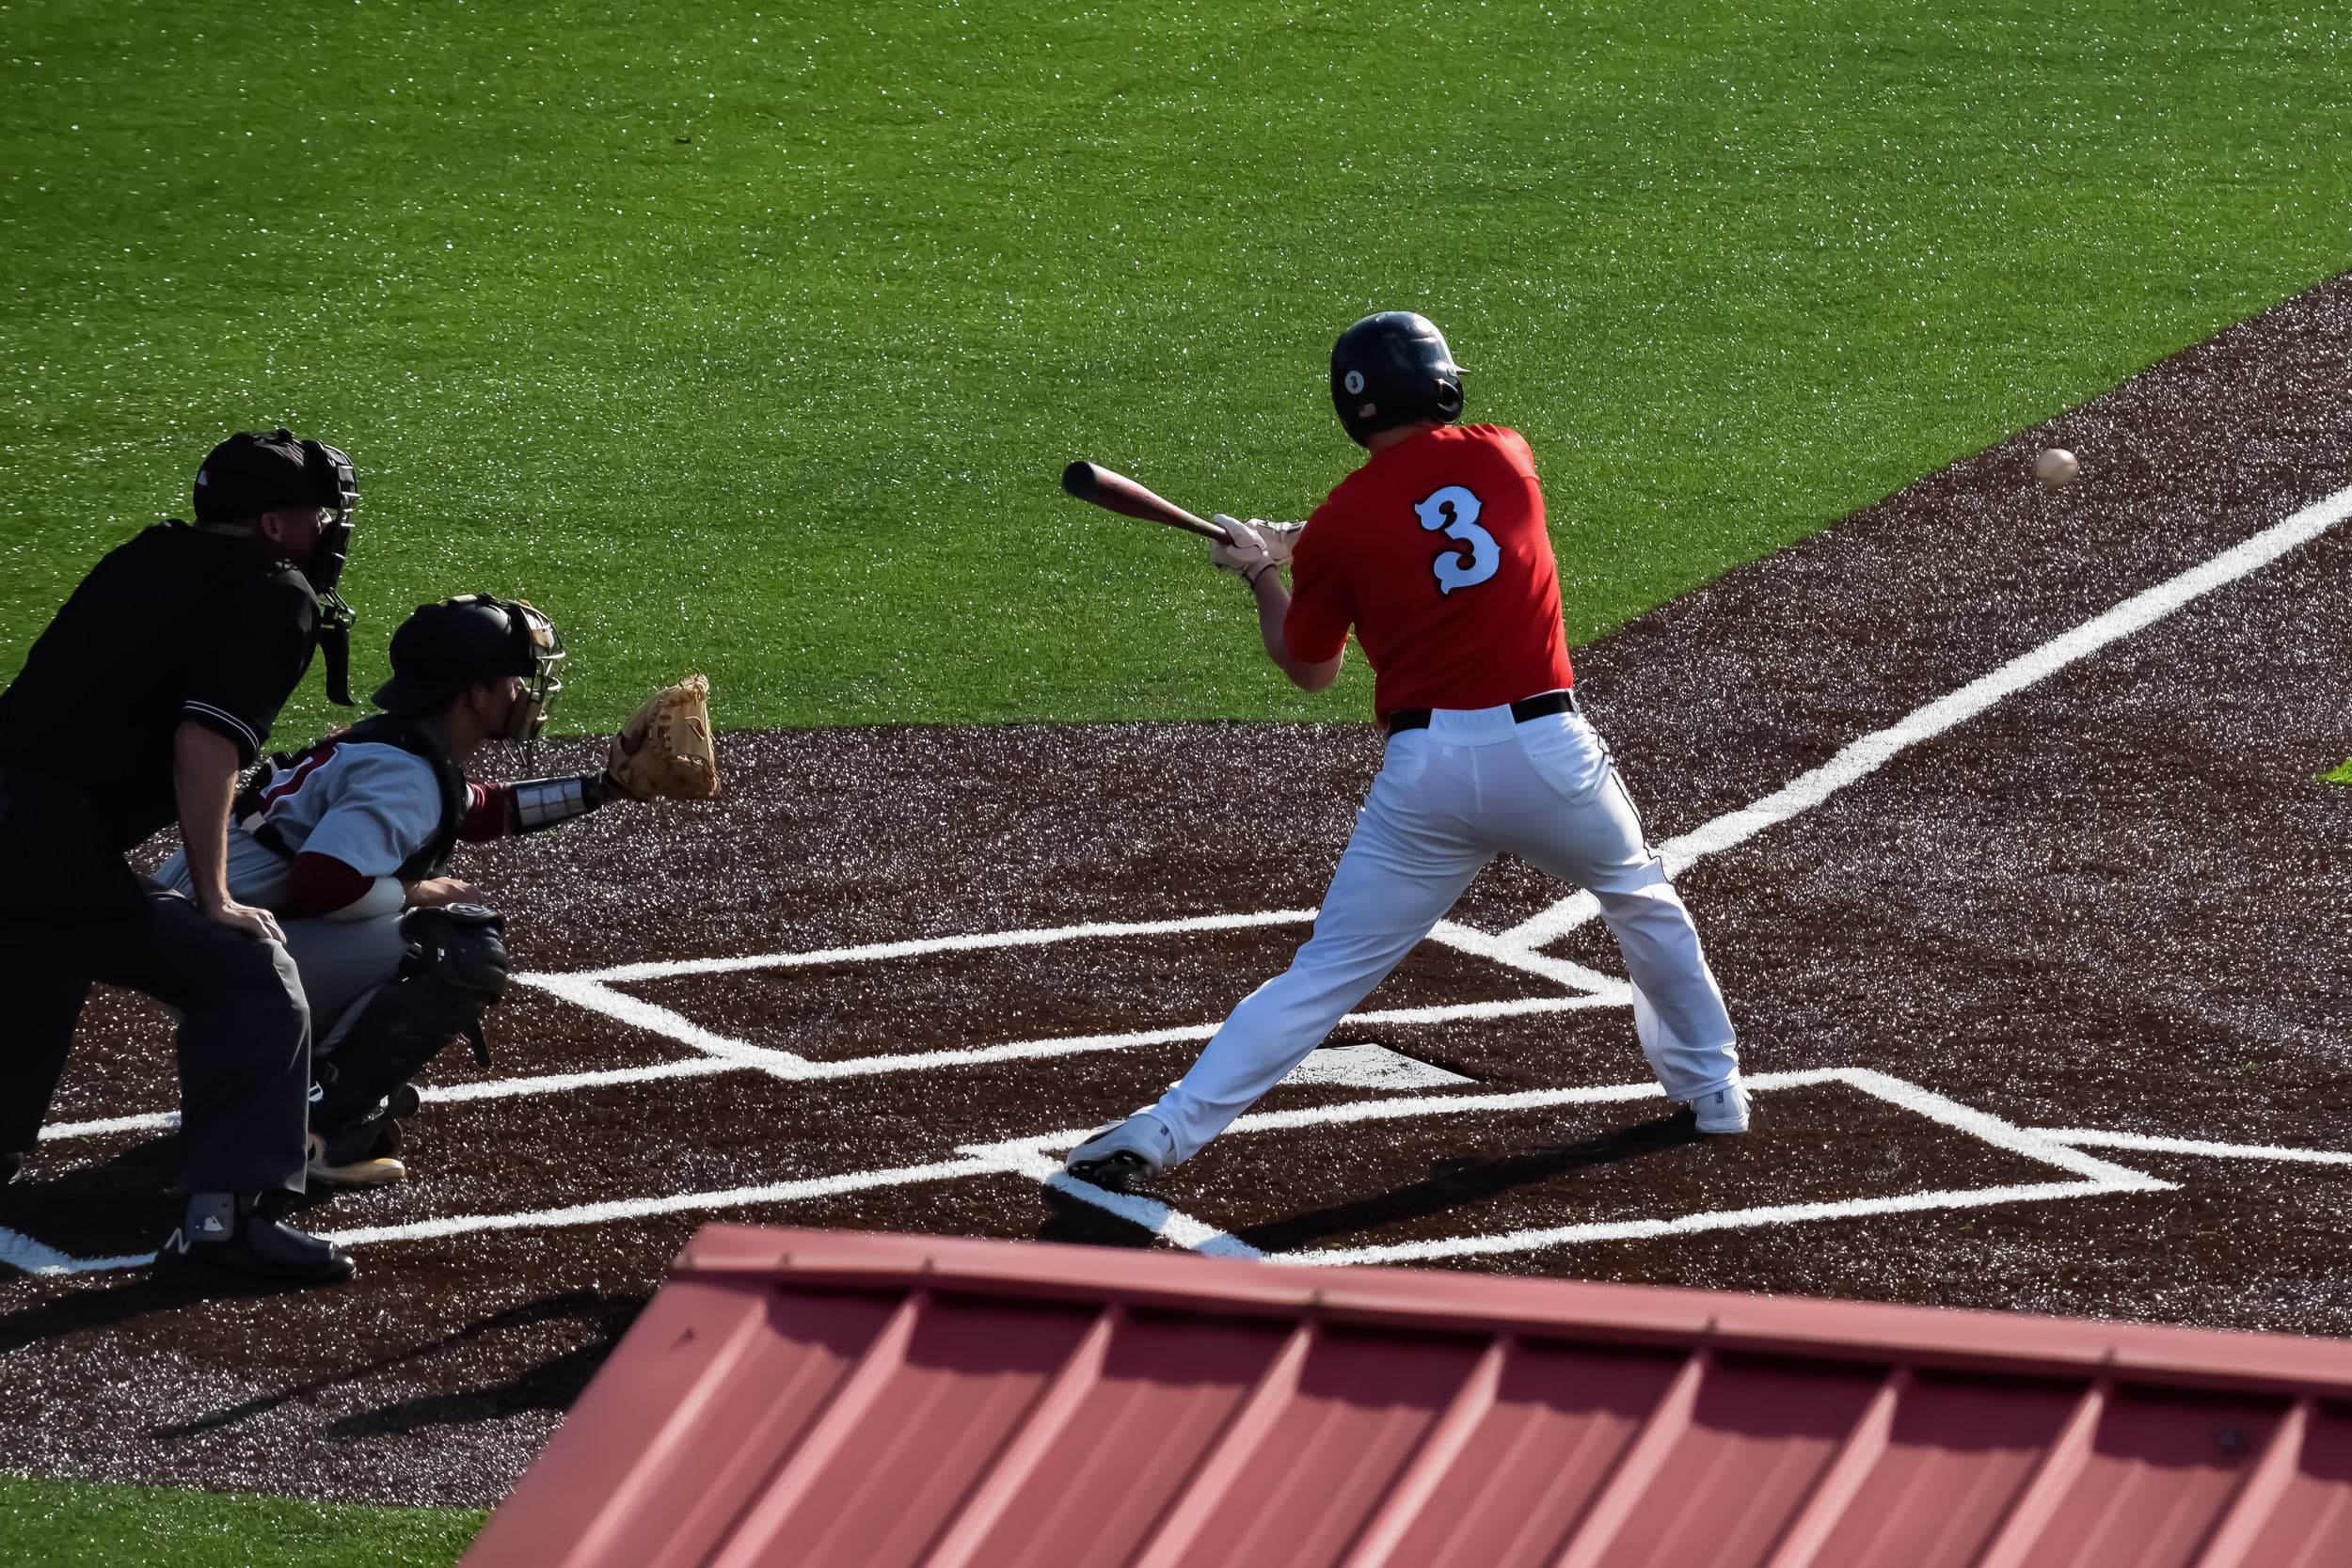 #3 Ryan Brown keeps his eyes on the ball as he plans to hit a grand slam.